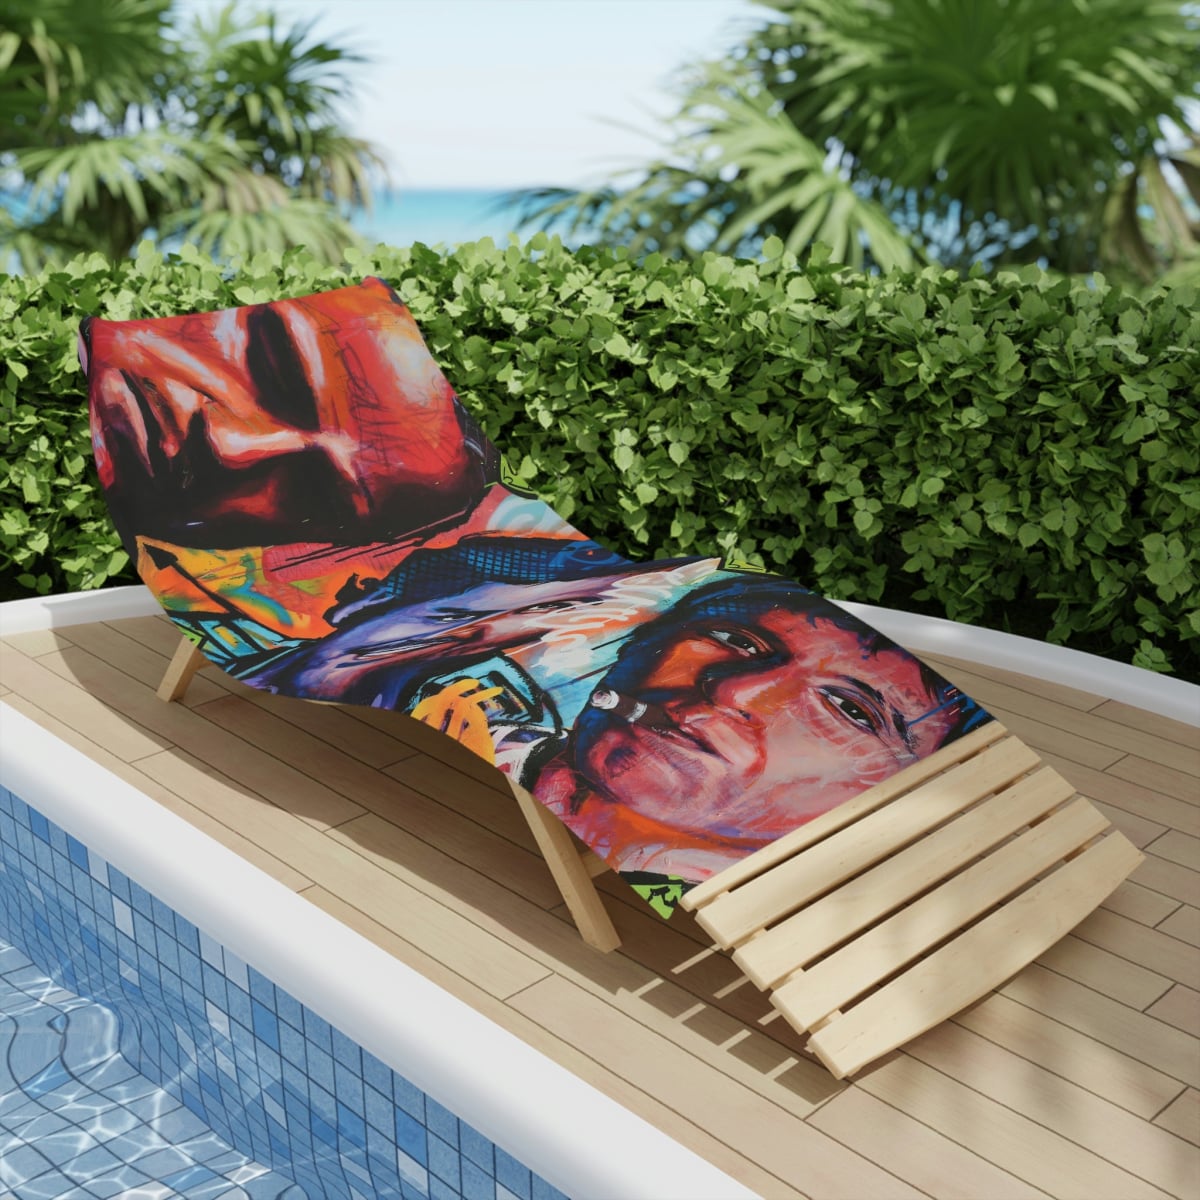 Pablo Escobar Don Corleone Scarface Beach Towels